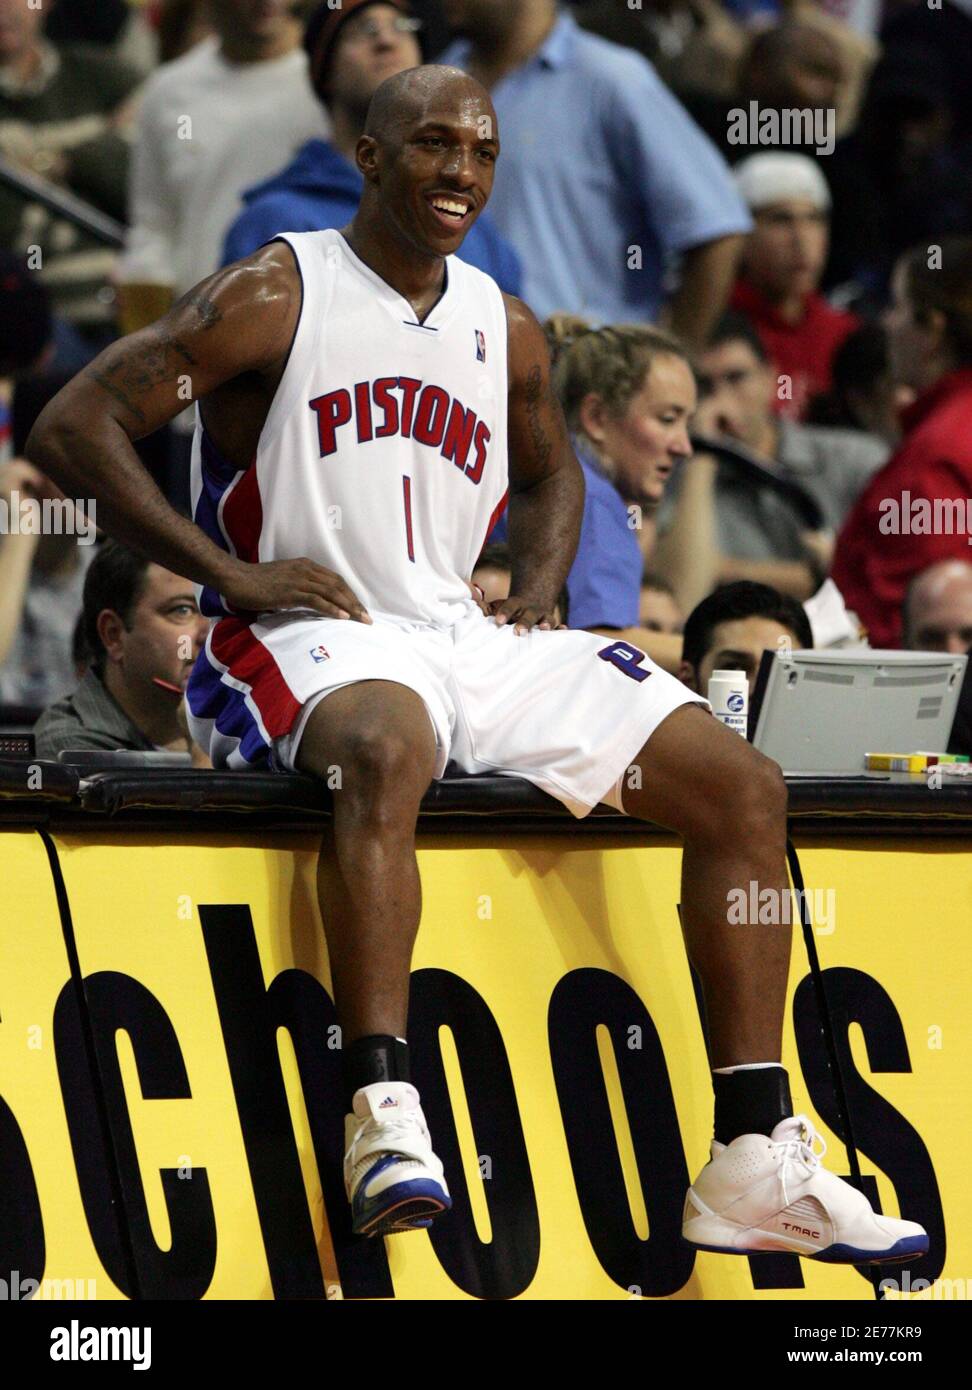 Detroit Pistons guard Chauncey Billups sits for a few seconds on the scorers table as he reacts to being called for a foul against the Boston Celtics during the third quarter of their NBA game at the Palace in Auburn Hills, Michigan November 15, 2005. Billups scored 17 of his 25 points in the third quarter as Detroit defeated Boston 115-110. REUTERS/Rebecca Cook Stock Photo